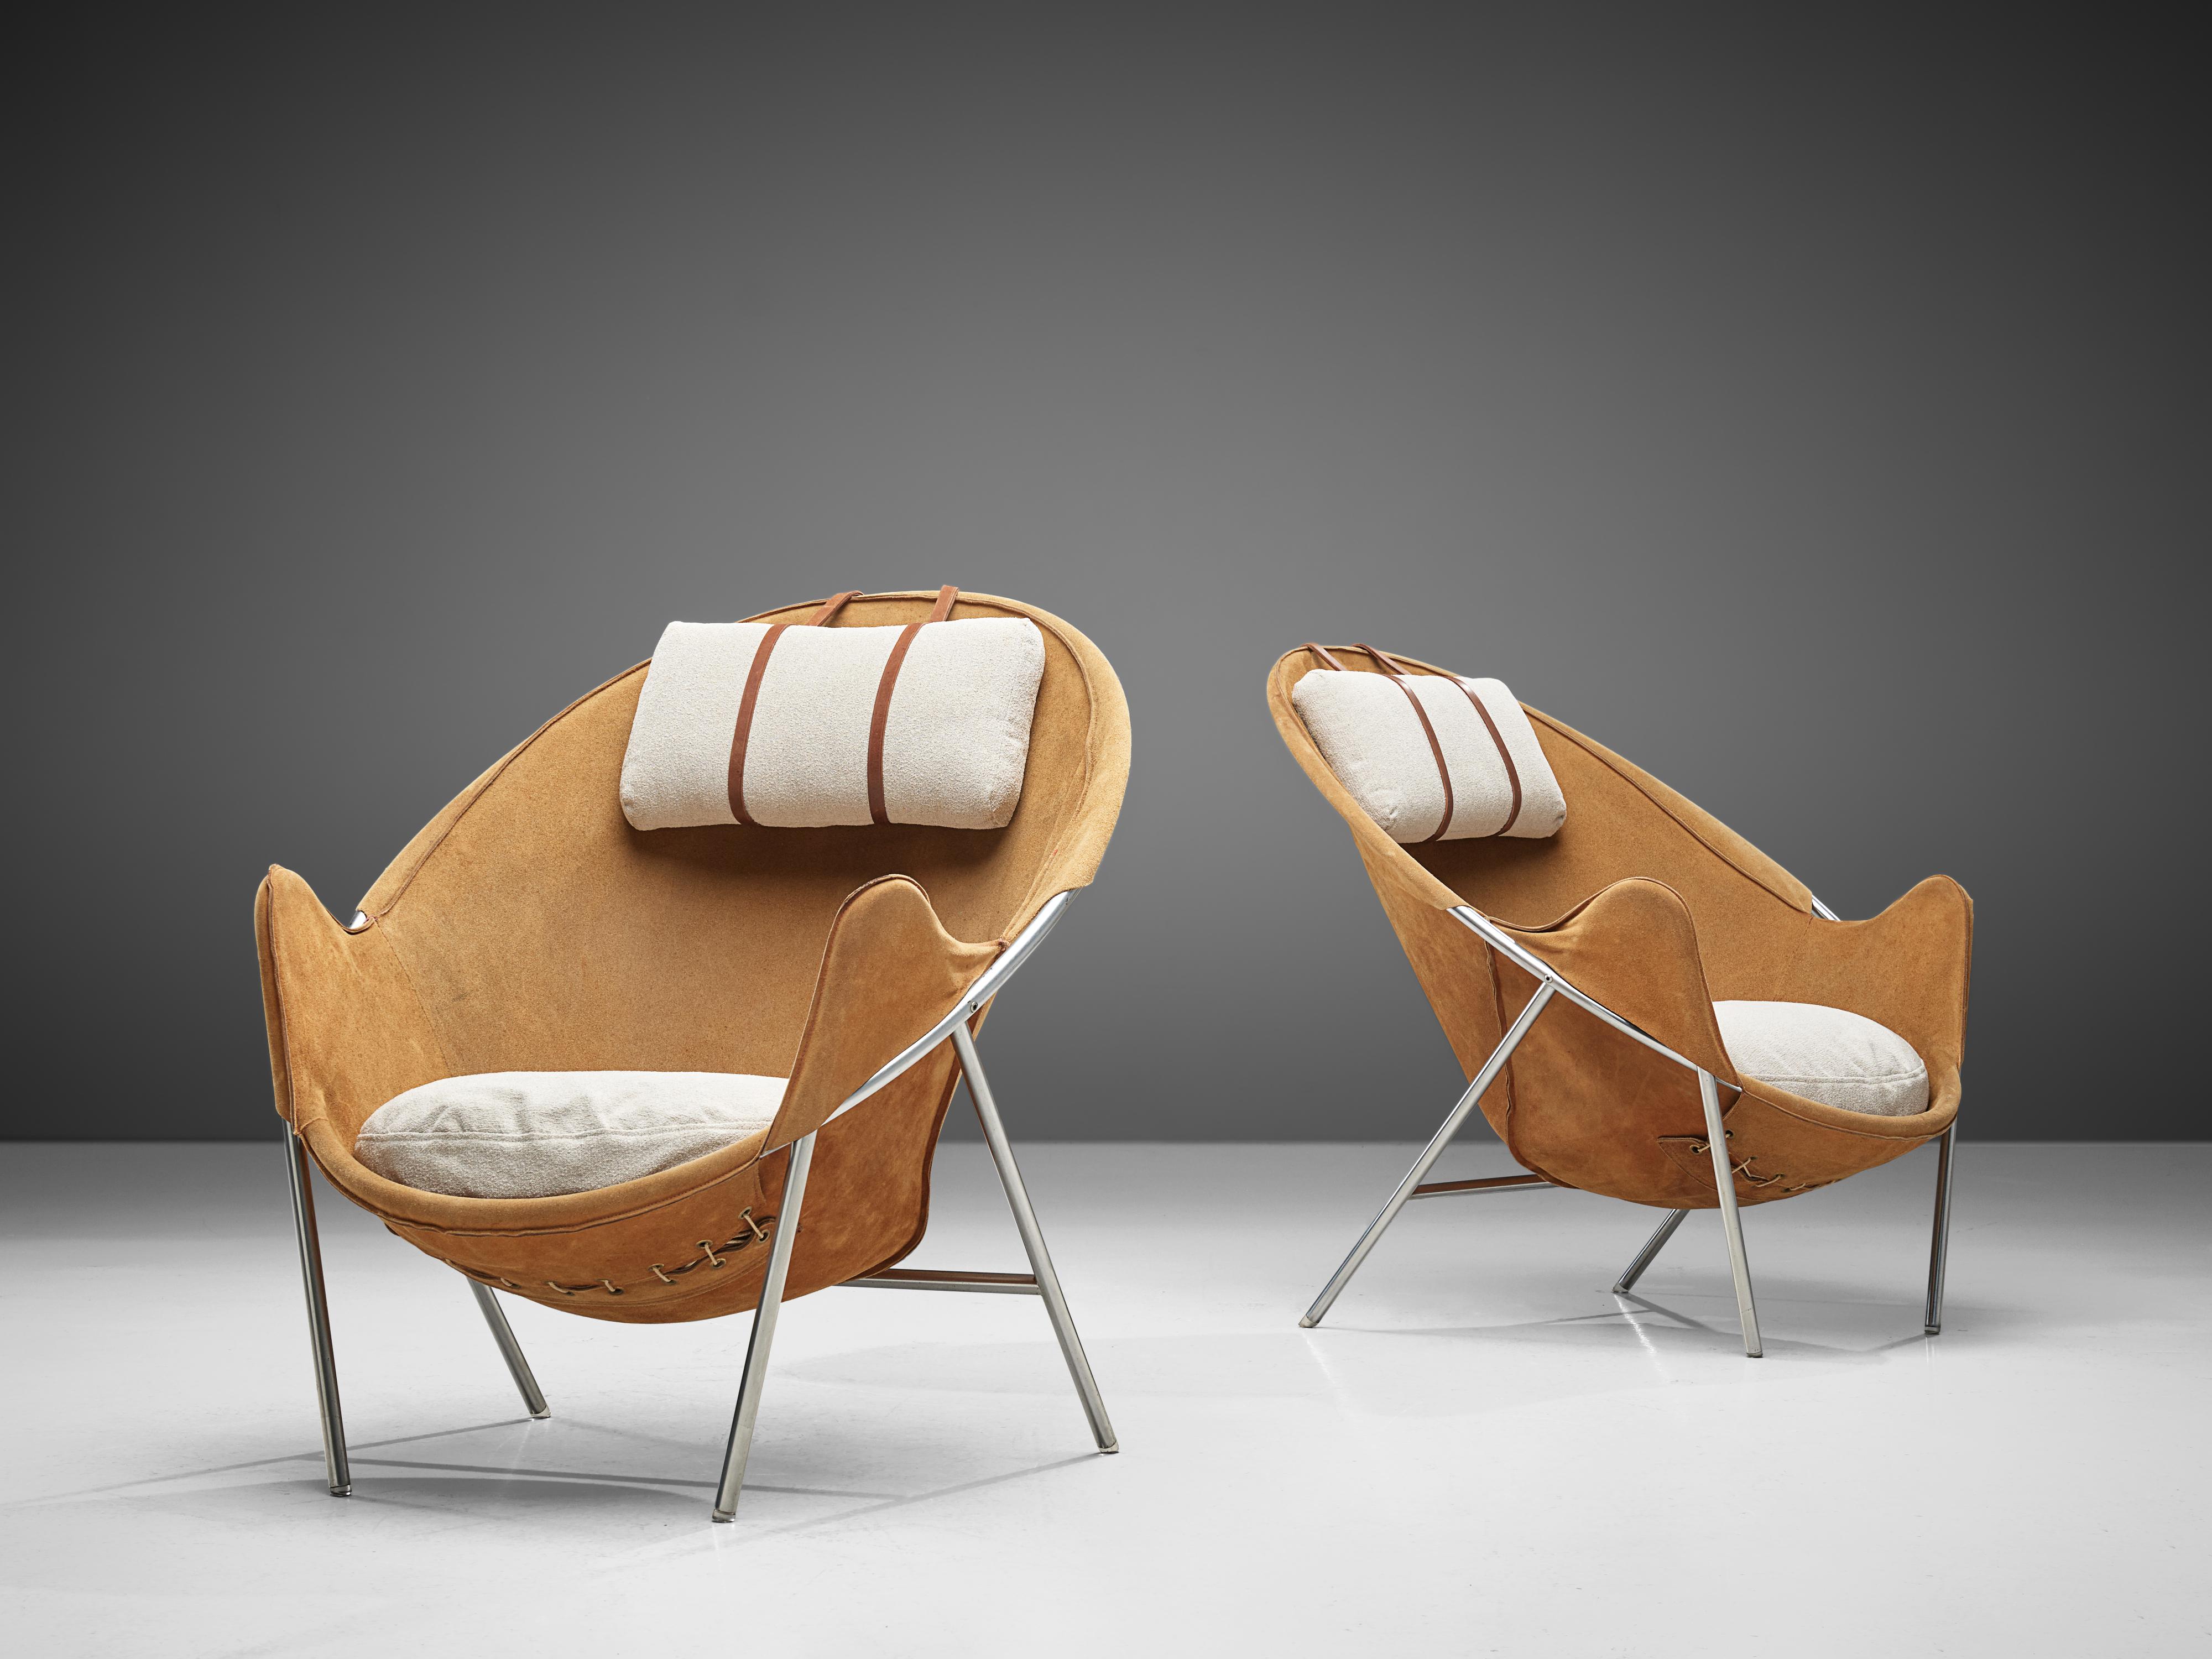 Erik Jørgensen, pair of lounge chairs, metal, suede, fabric, wood, Denmark, design 1953

This set of two easy chairs is executed in cognac suede. These sling chairs consist of a chromed tubular frame in a round shape. To increase the comfort,